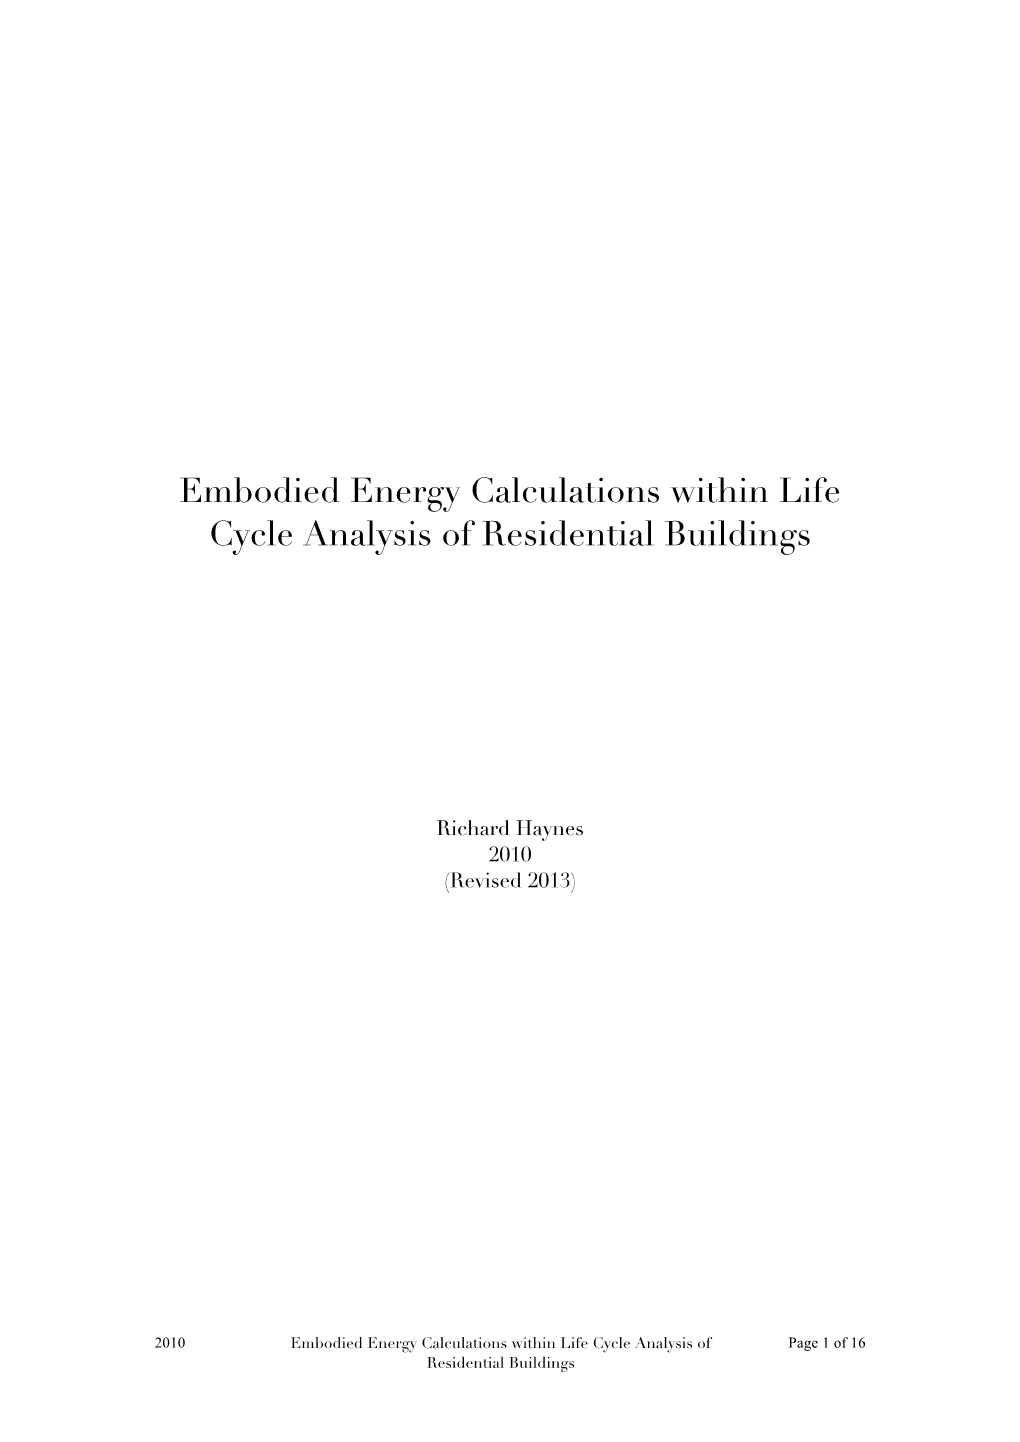 Embodied Energy Calculations Within Life Cycle Analysis of Residential Buildings